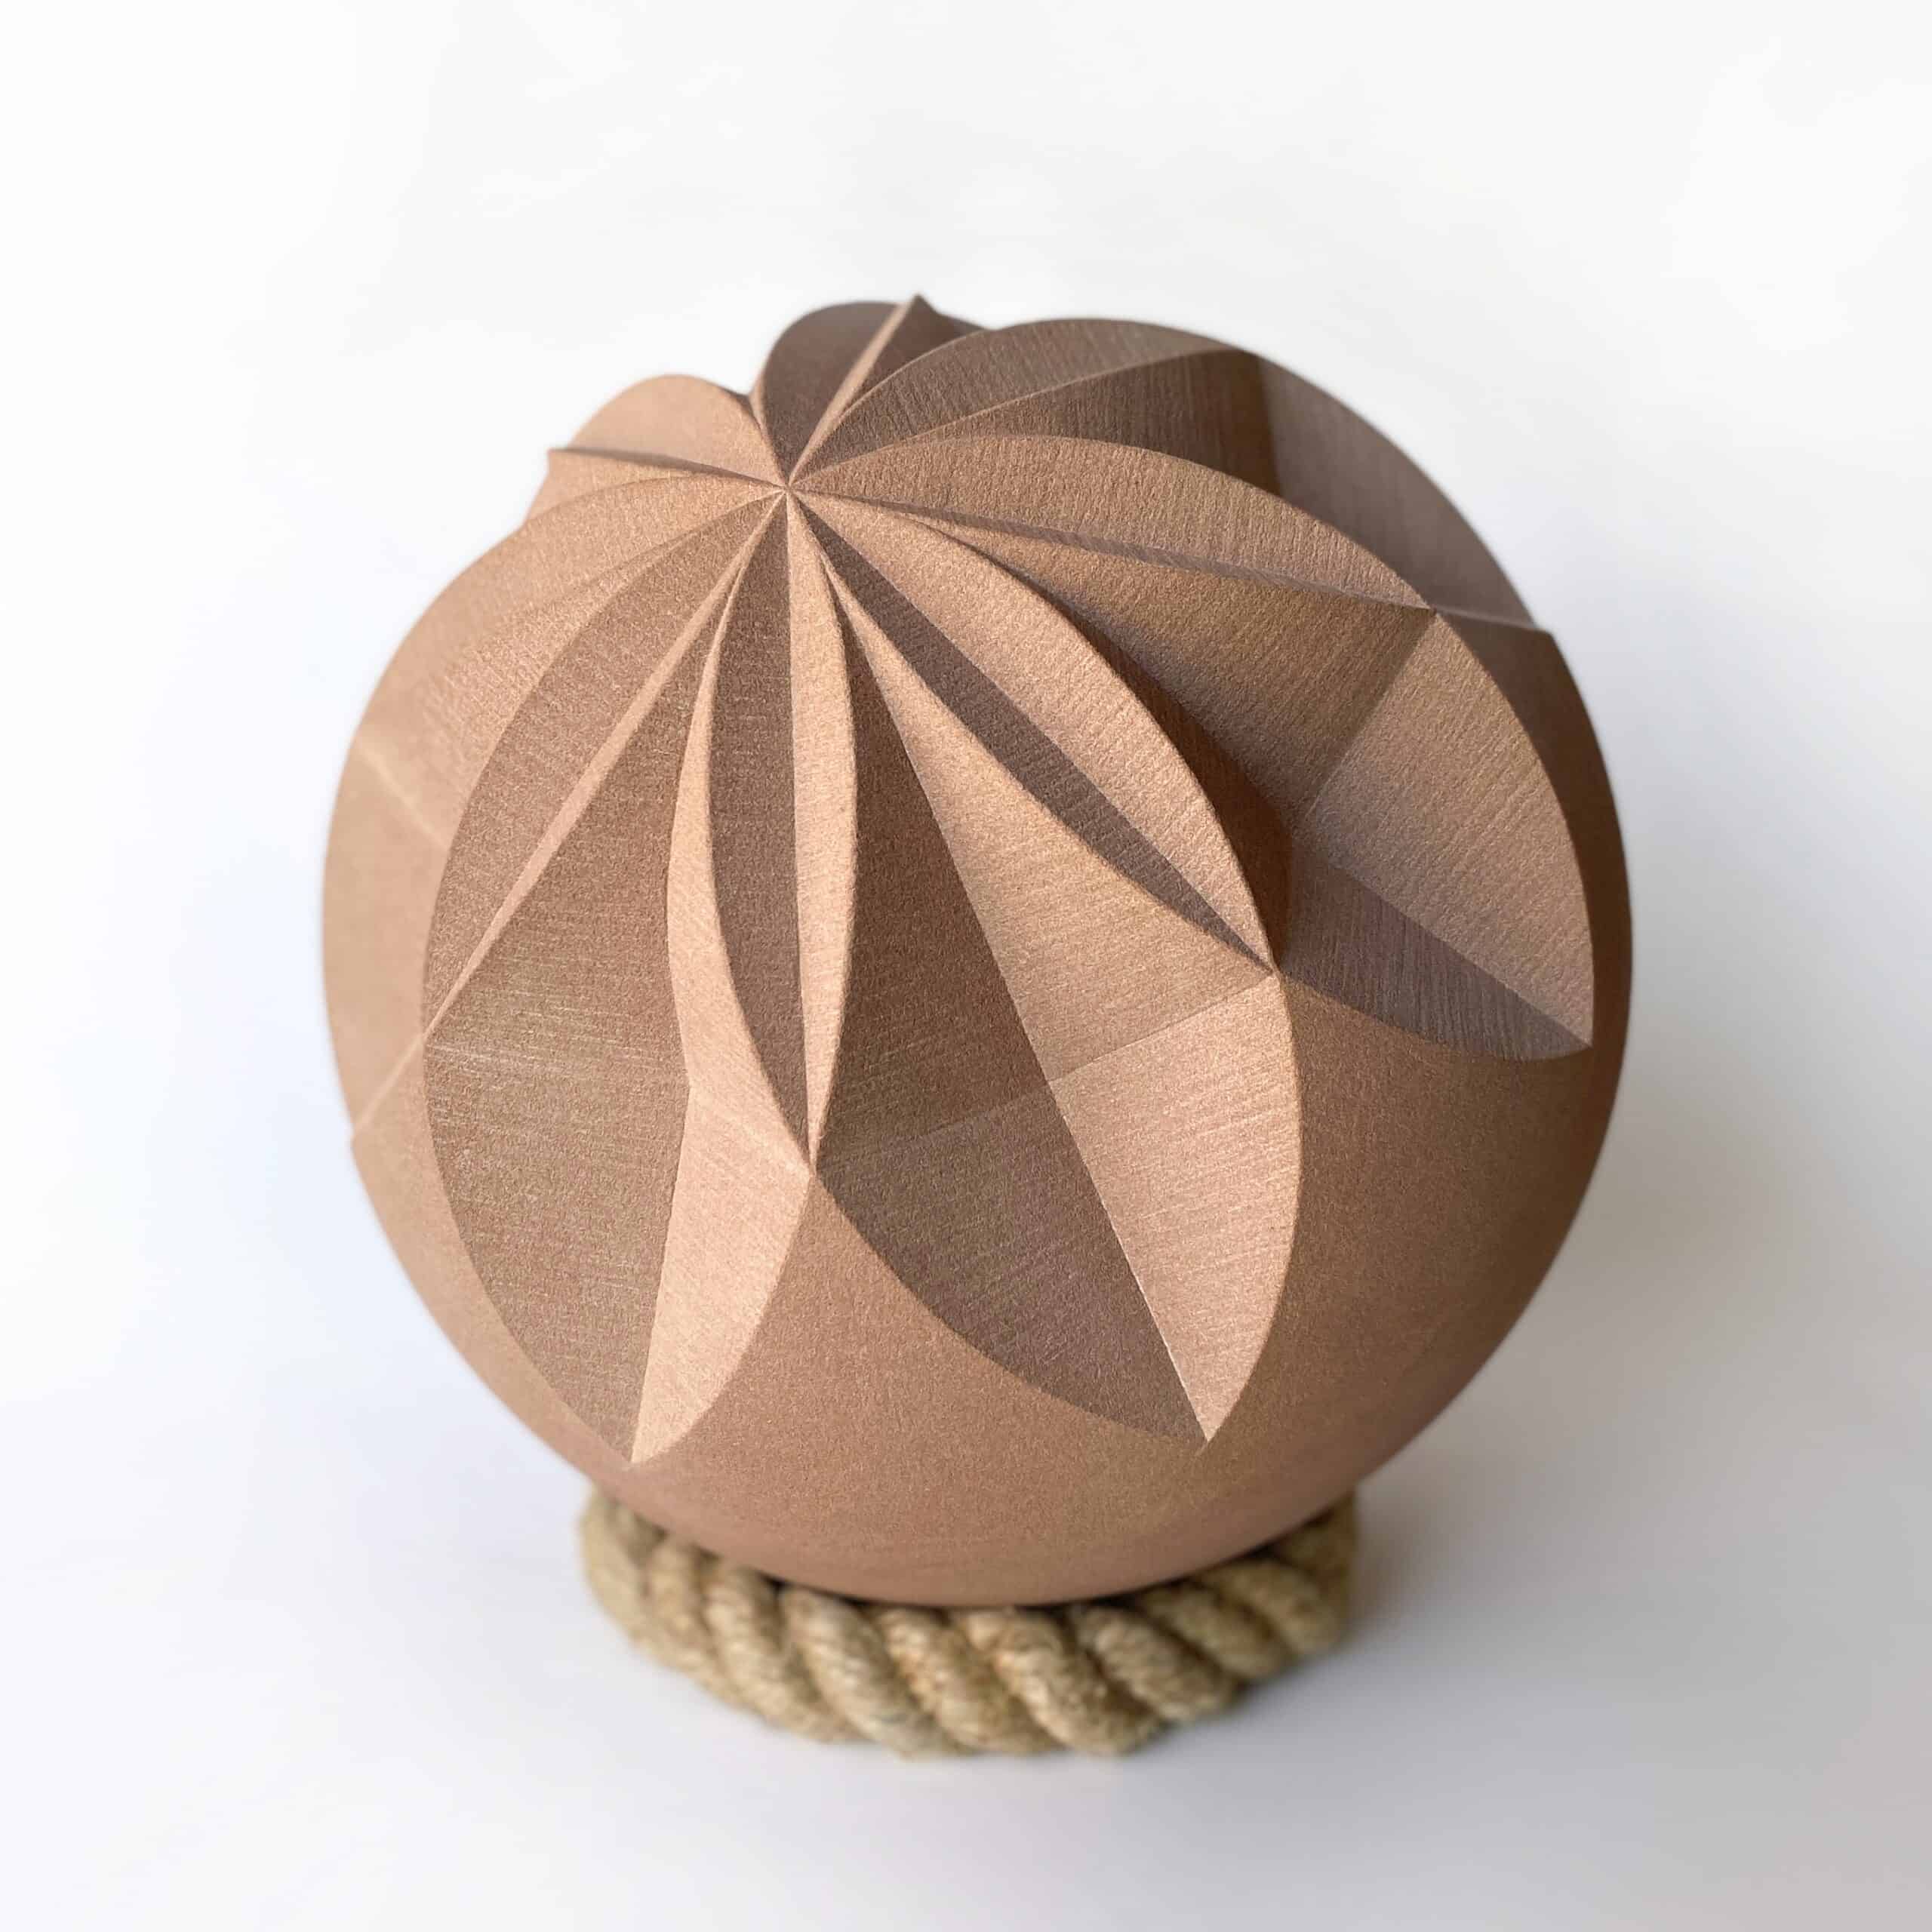 Red sandstone sphere carved with a geometric pattern